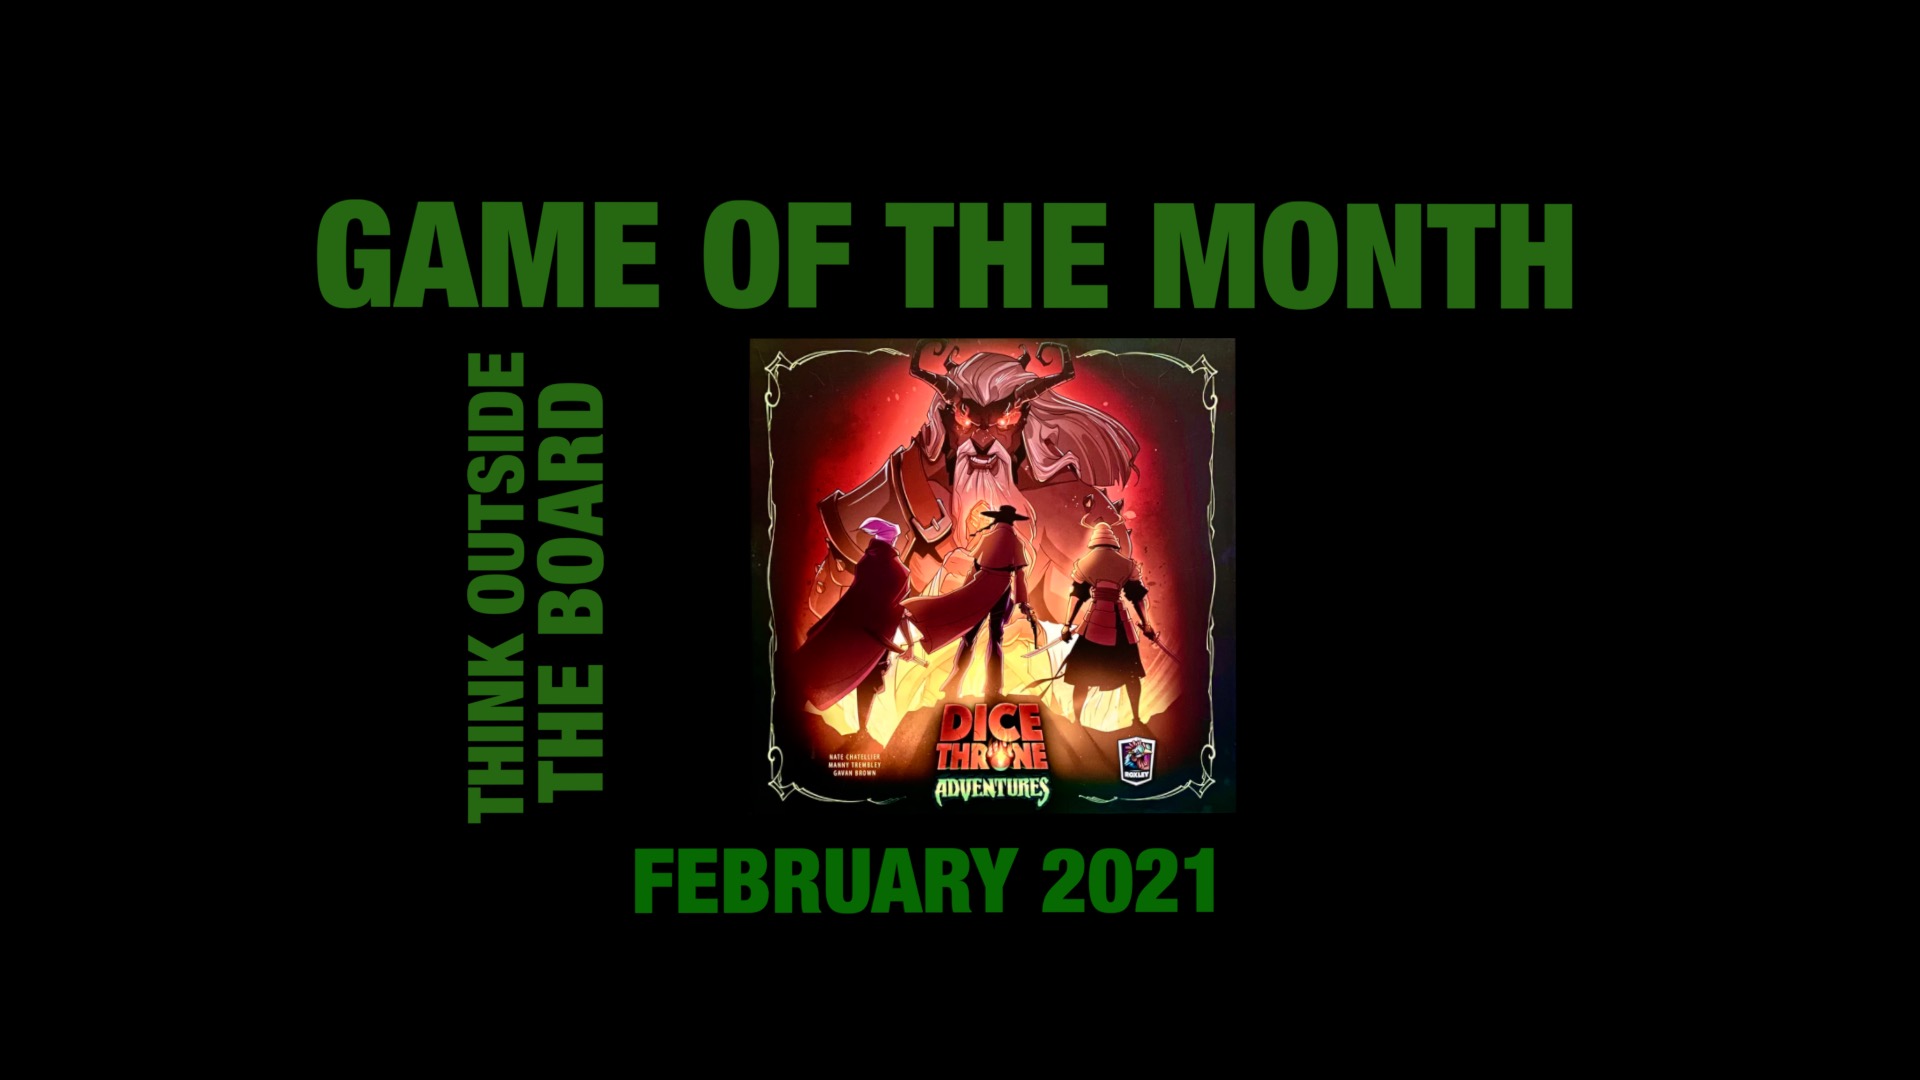 Game of the Month, February 2021